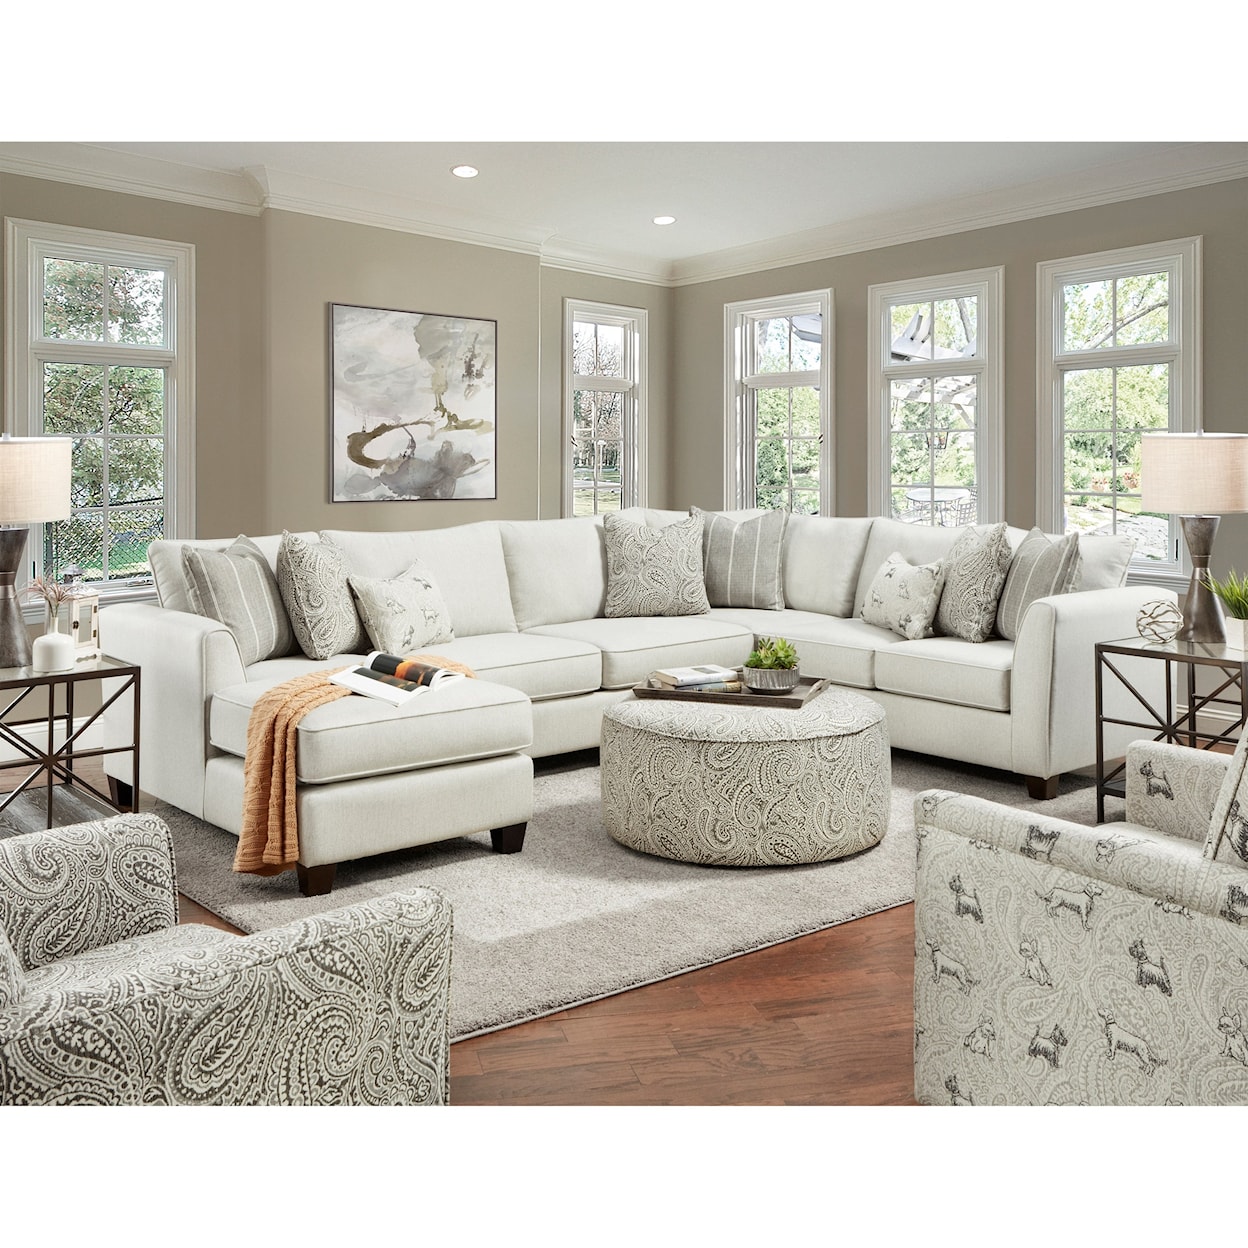 VFM Signature 28 HOMECOMING STONE (REVOLUTION) 3-Piece Sectional with Chaise